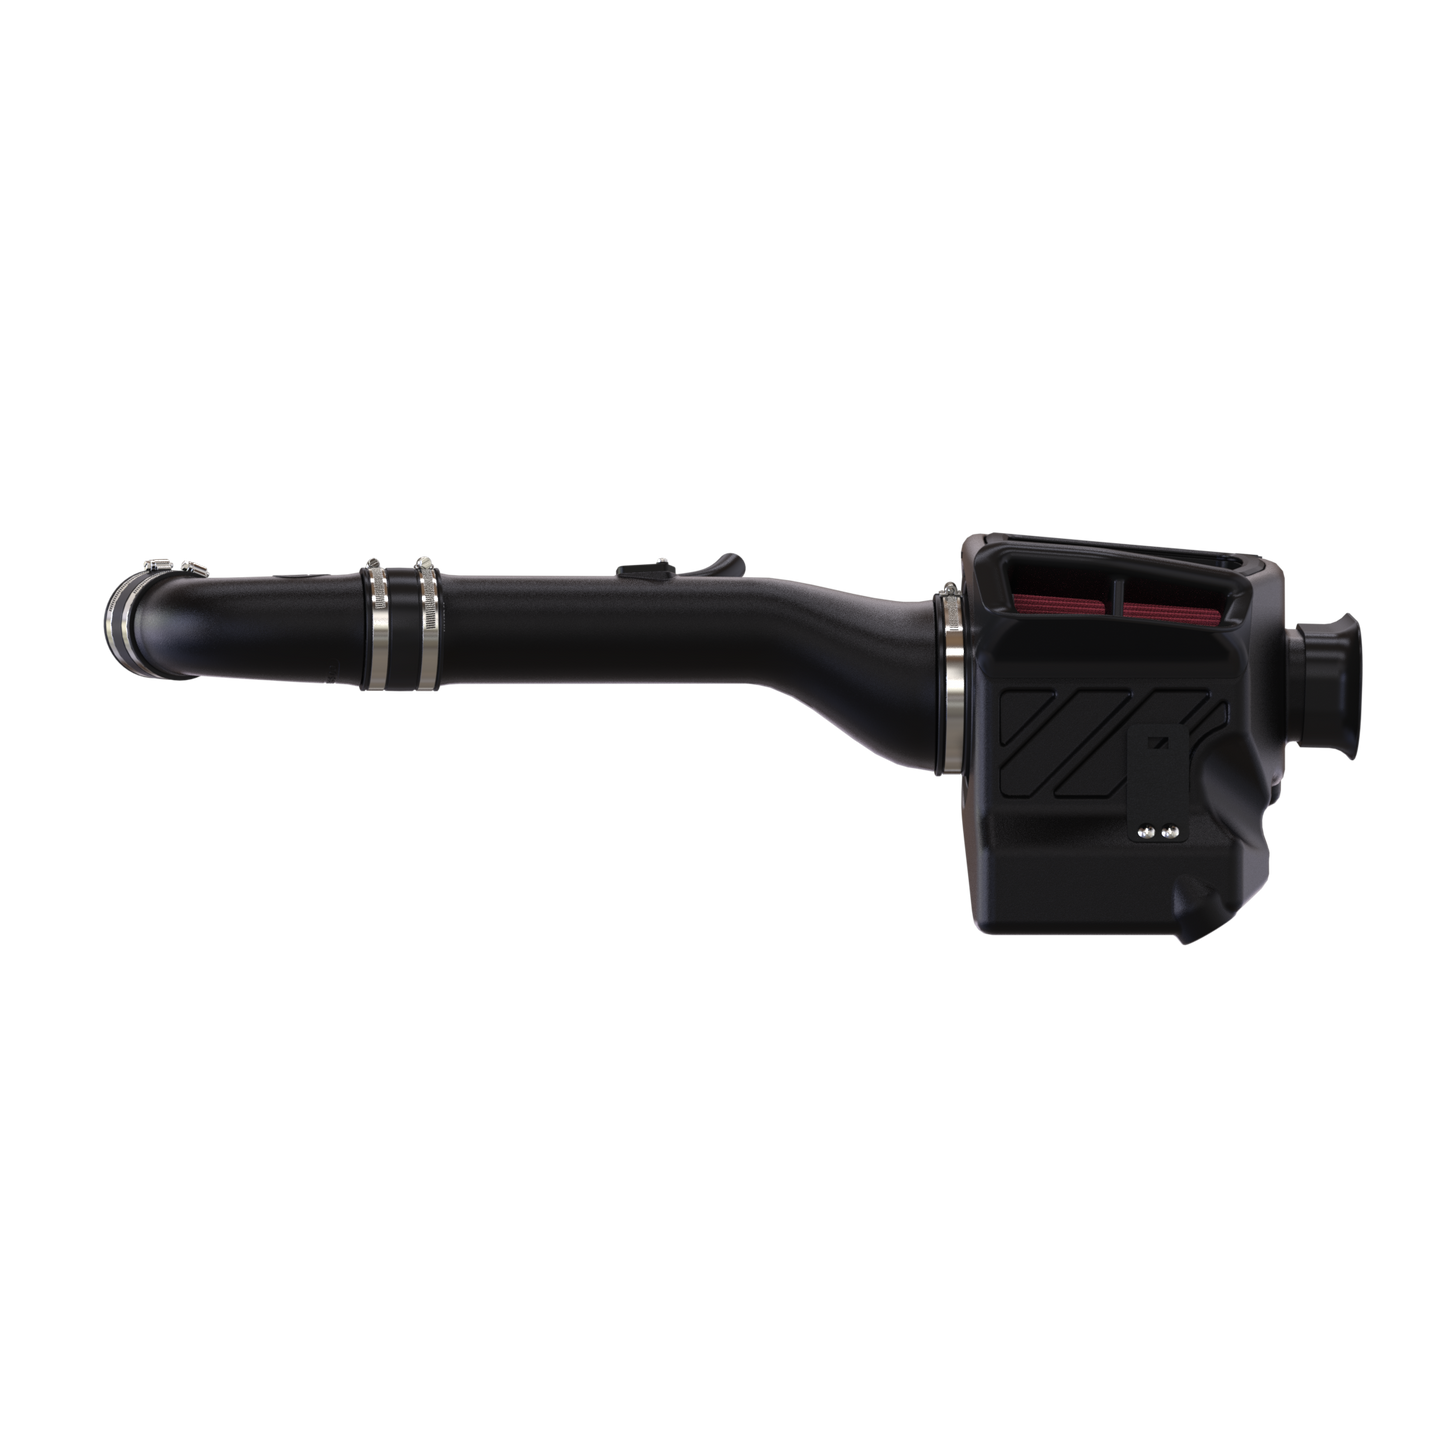 COLD AIR INTAKE FOR 2005-2019 NISSAN FRONTIER, 2005-2012 PATHFINDER, 2005-2015 XTERRA 4.0L